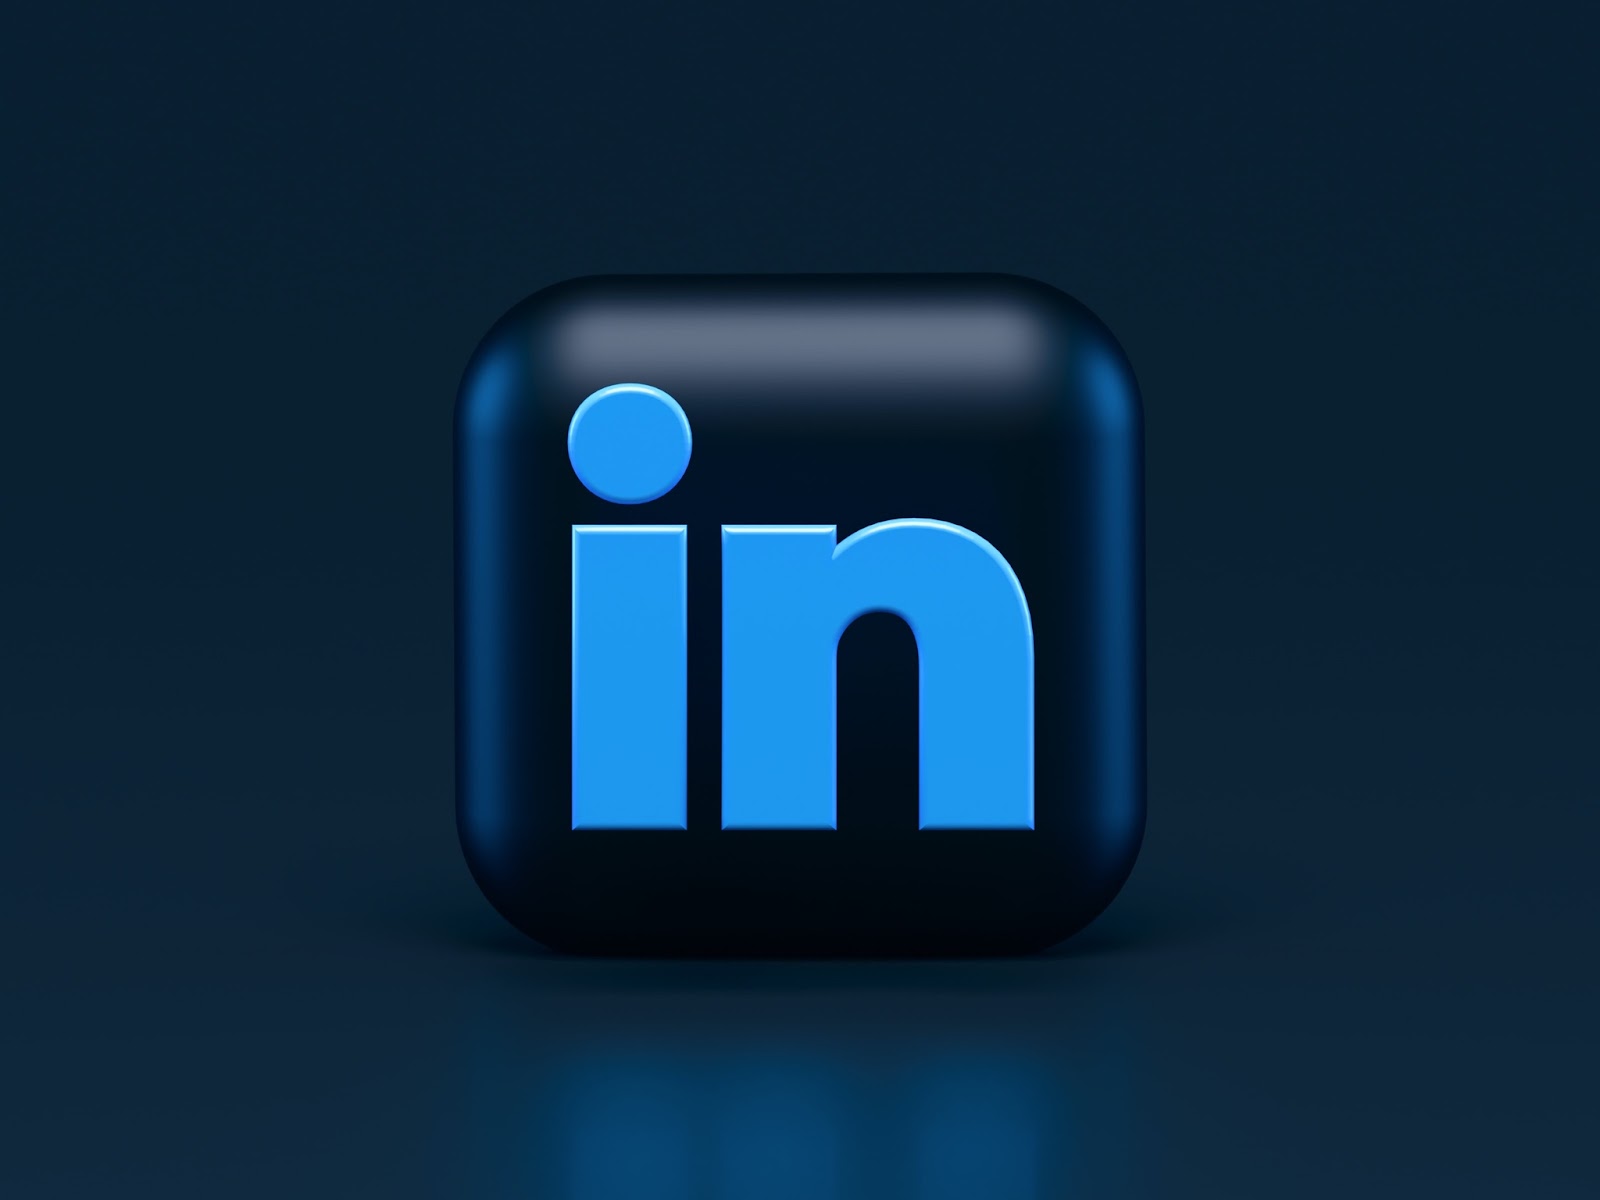 How to Protect Your Brand Reputation With LinkedIn Audience Network